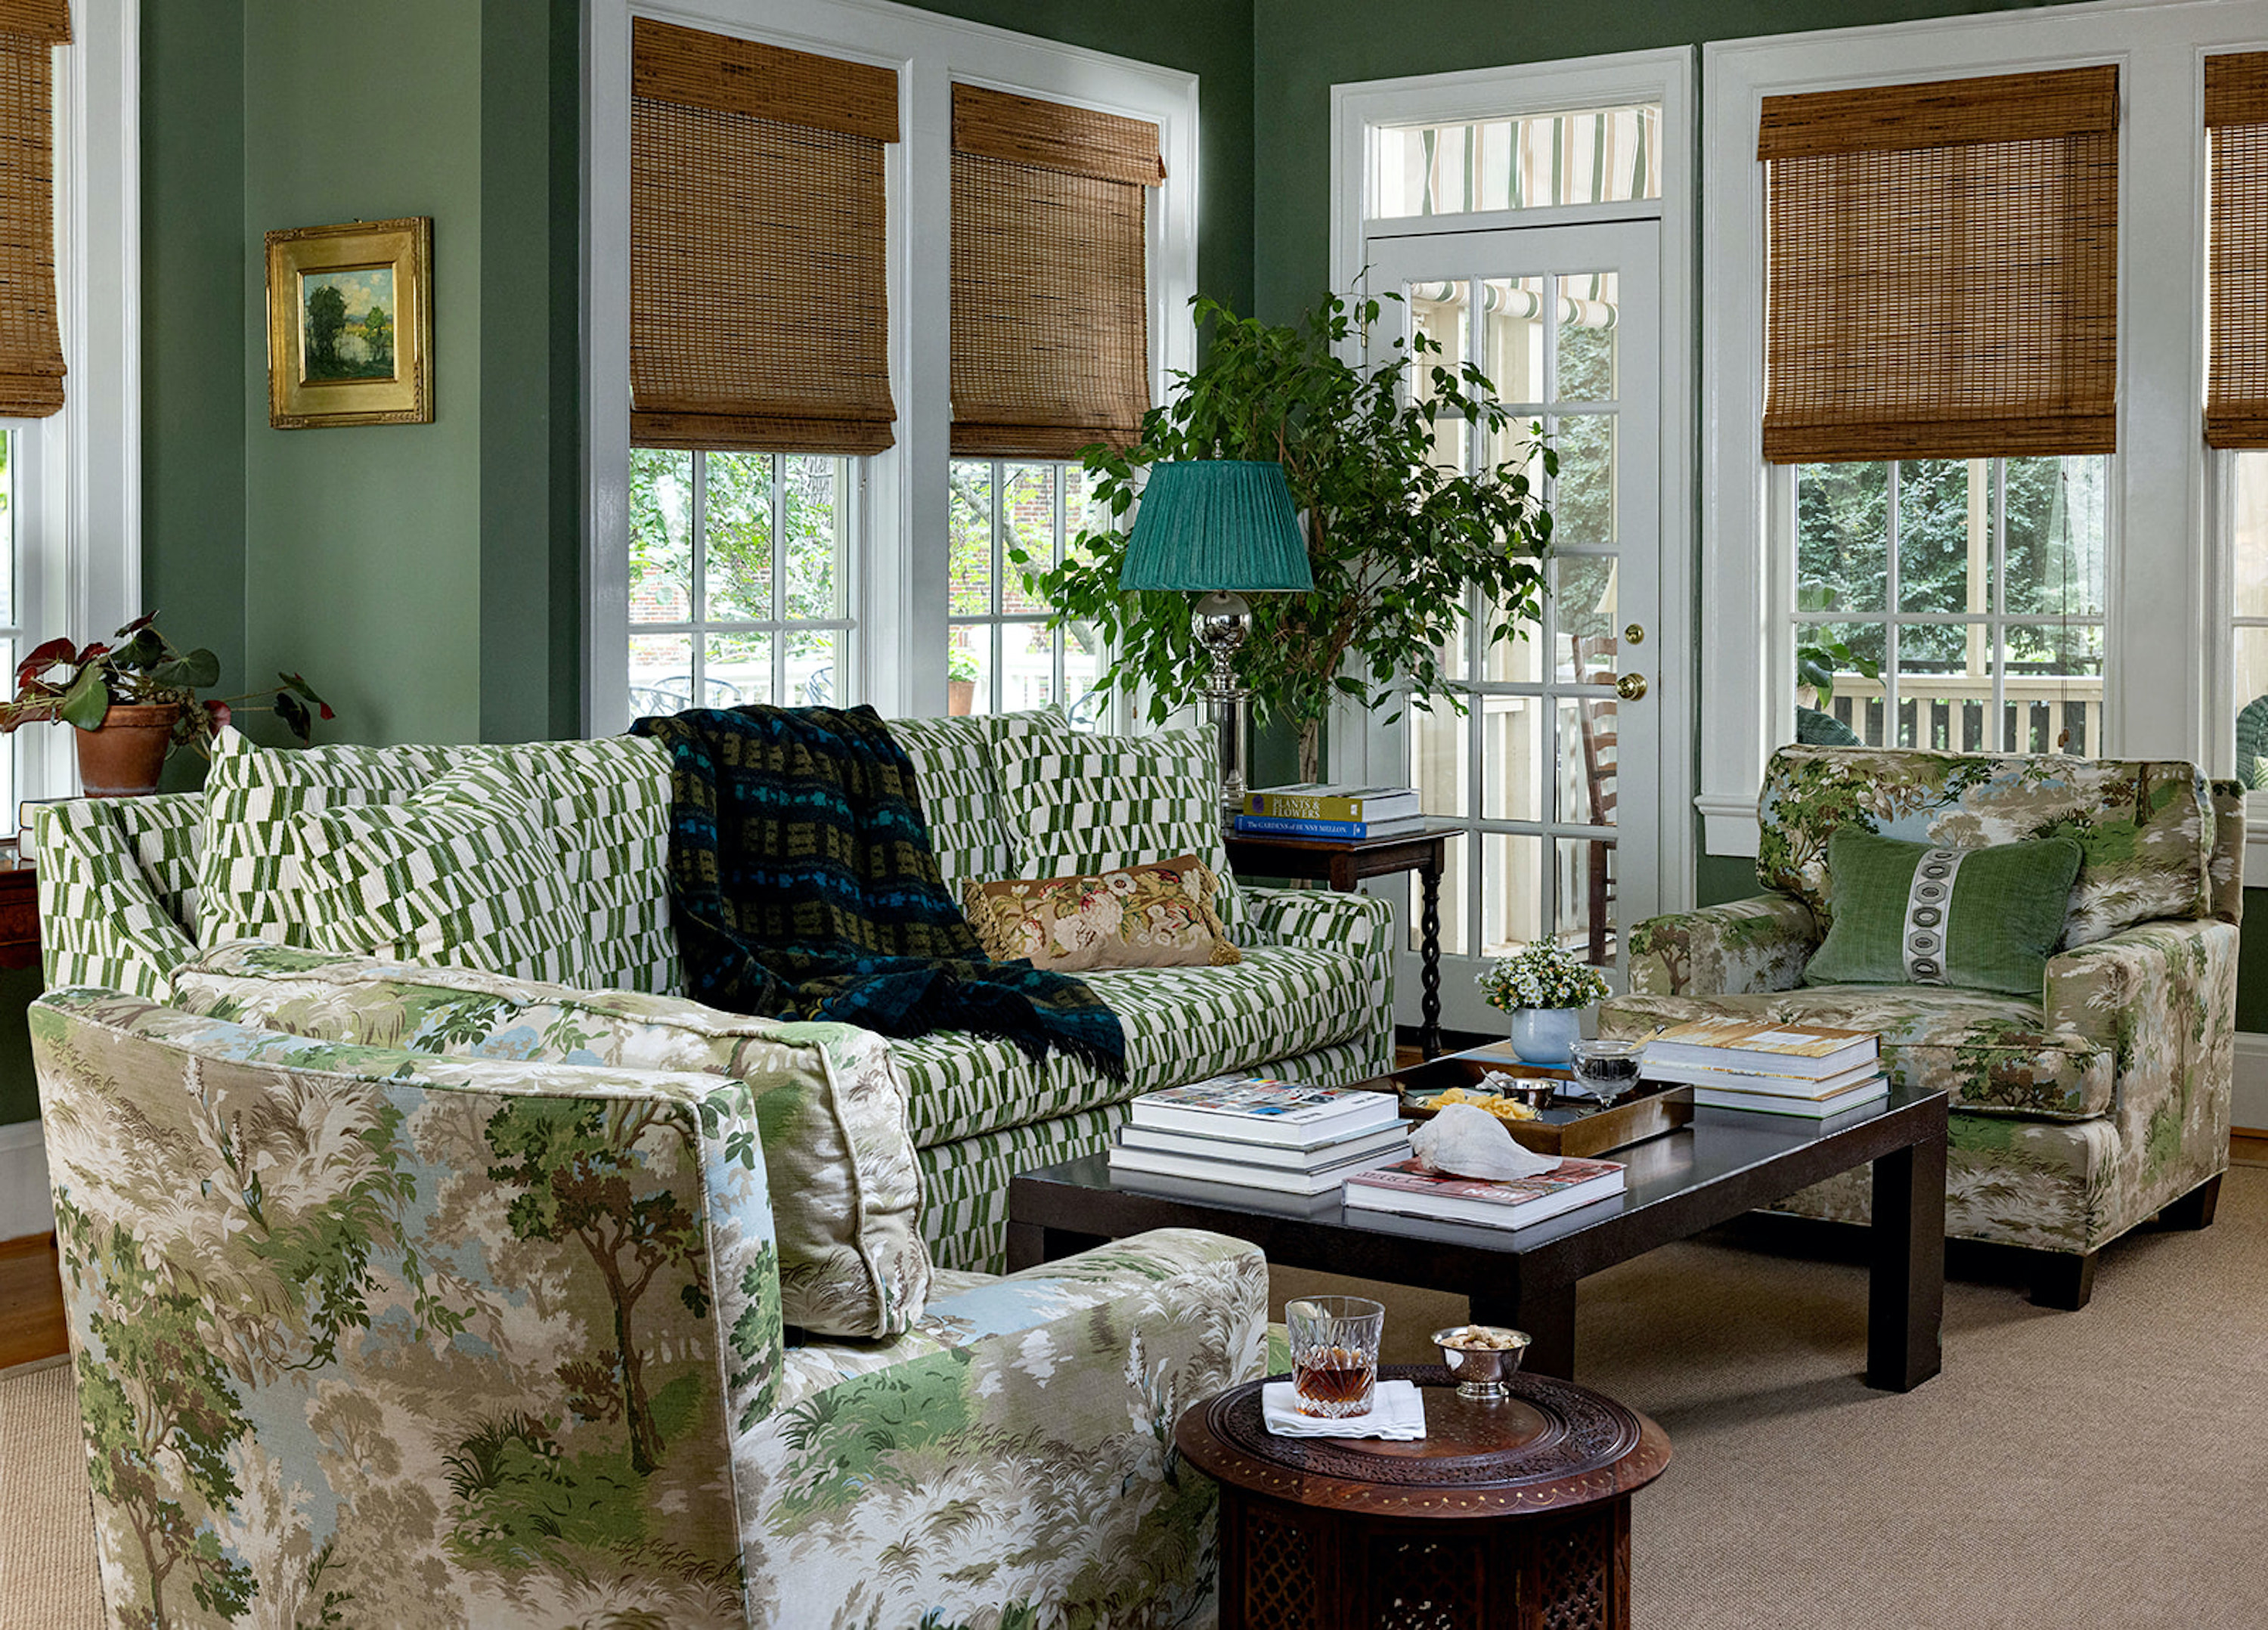 The living room has earthy green walls and chair fabrics with green details.